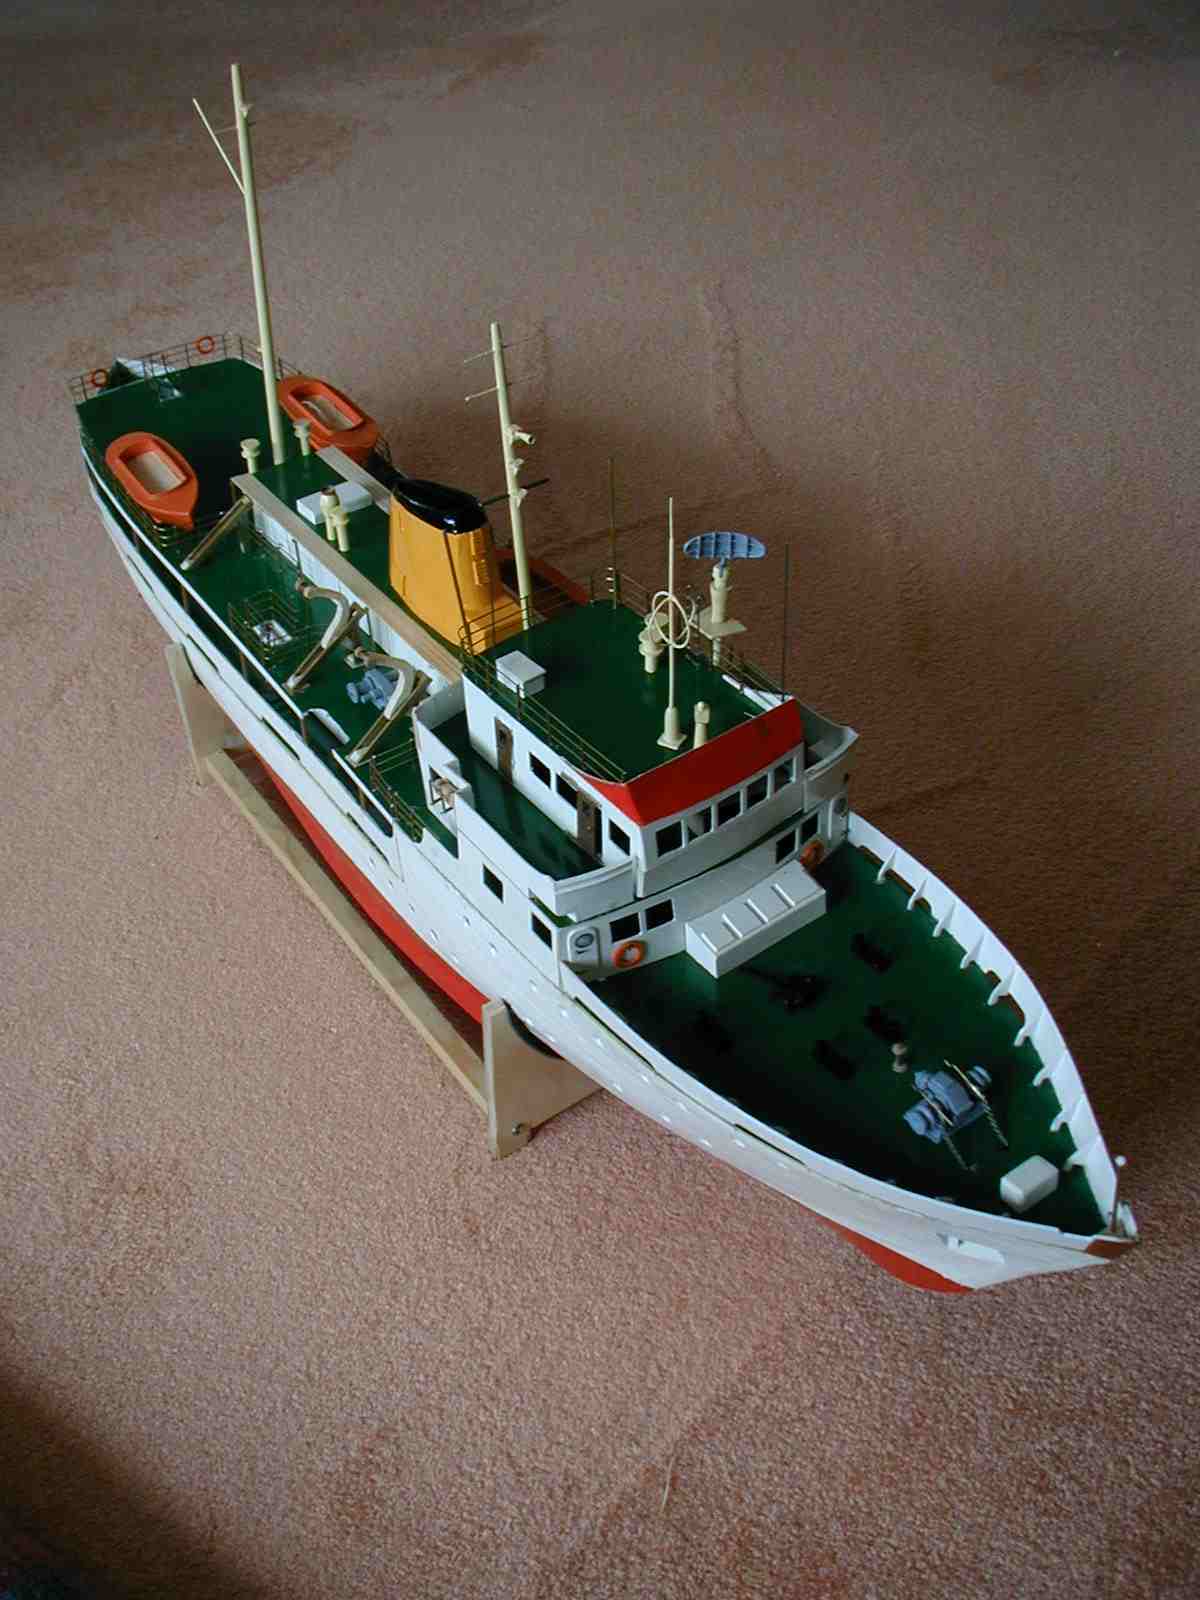 Hull, decks and superstructure arecolored meanwhile only some glue ...